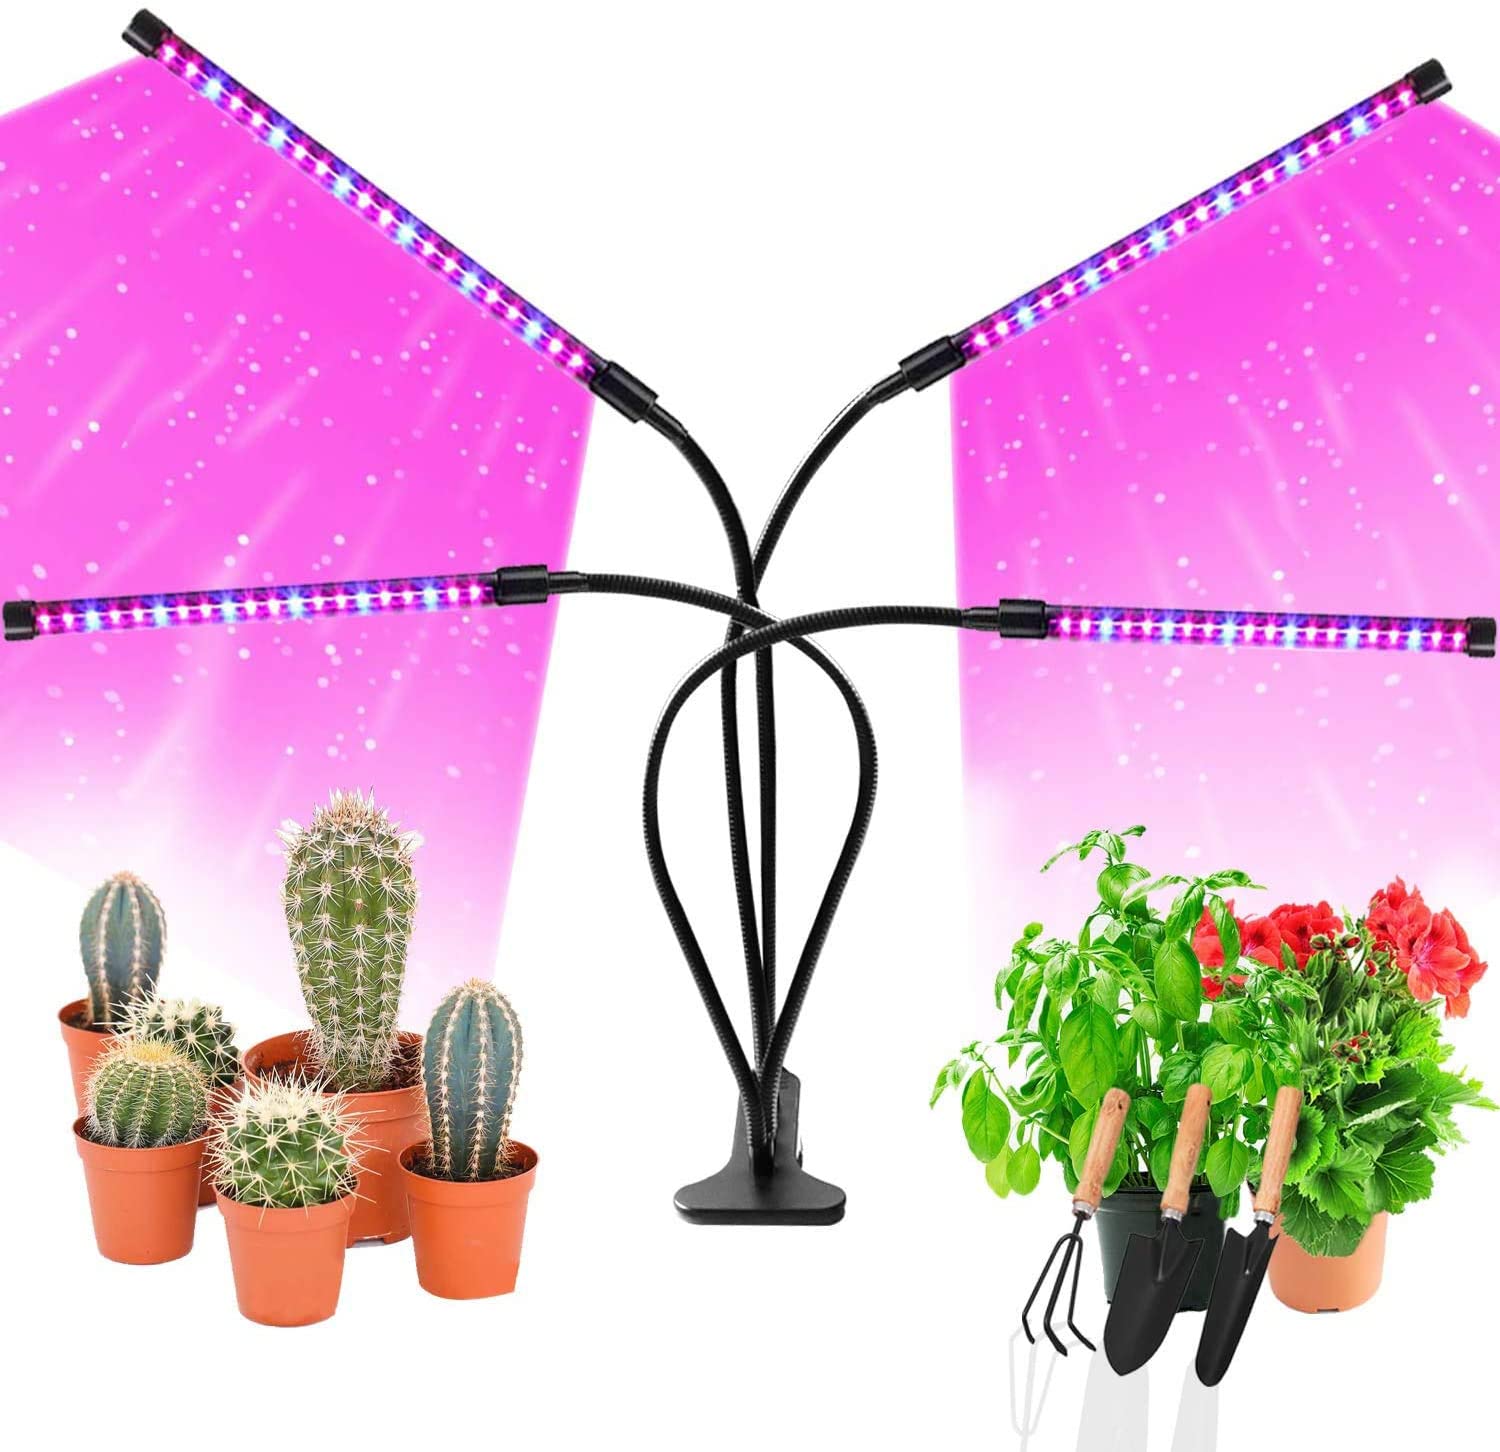 80w (4-prong) Adjustable and Dimmable LED Grow Lights for Indoor Plants w/ Timer $14 + free s/h at Amazon